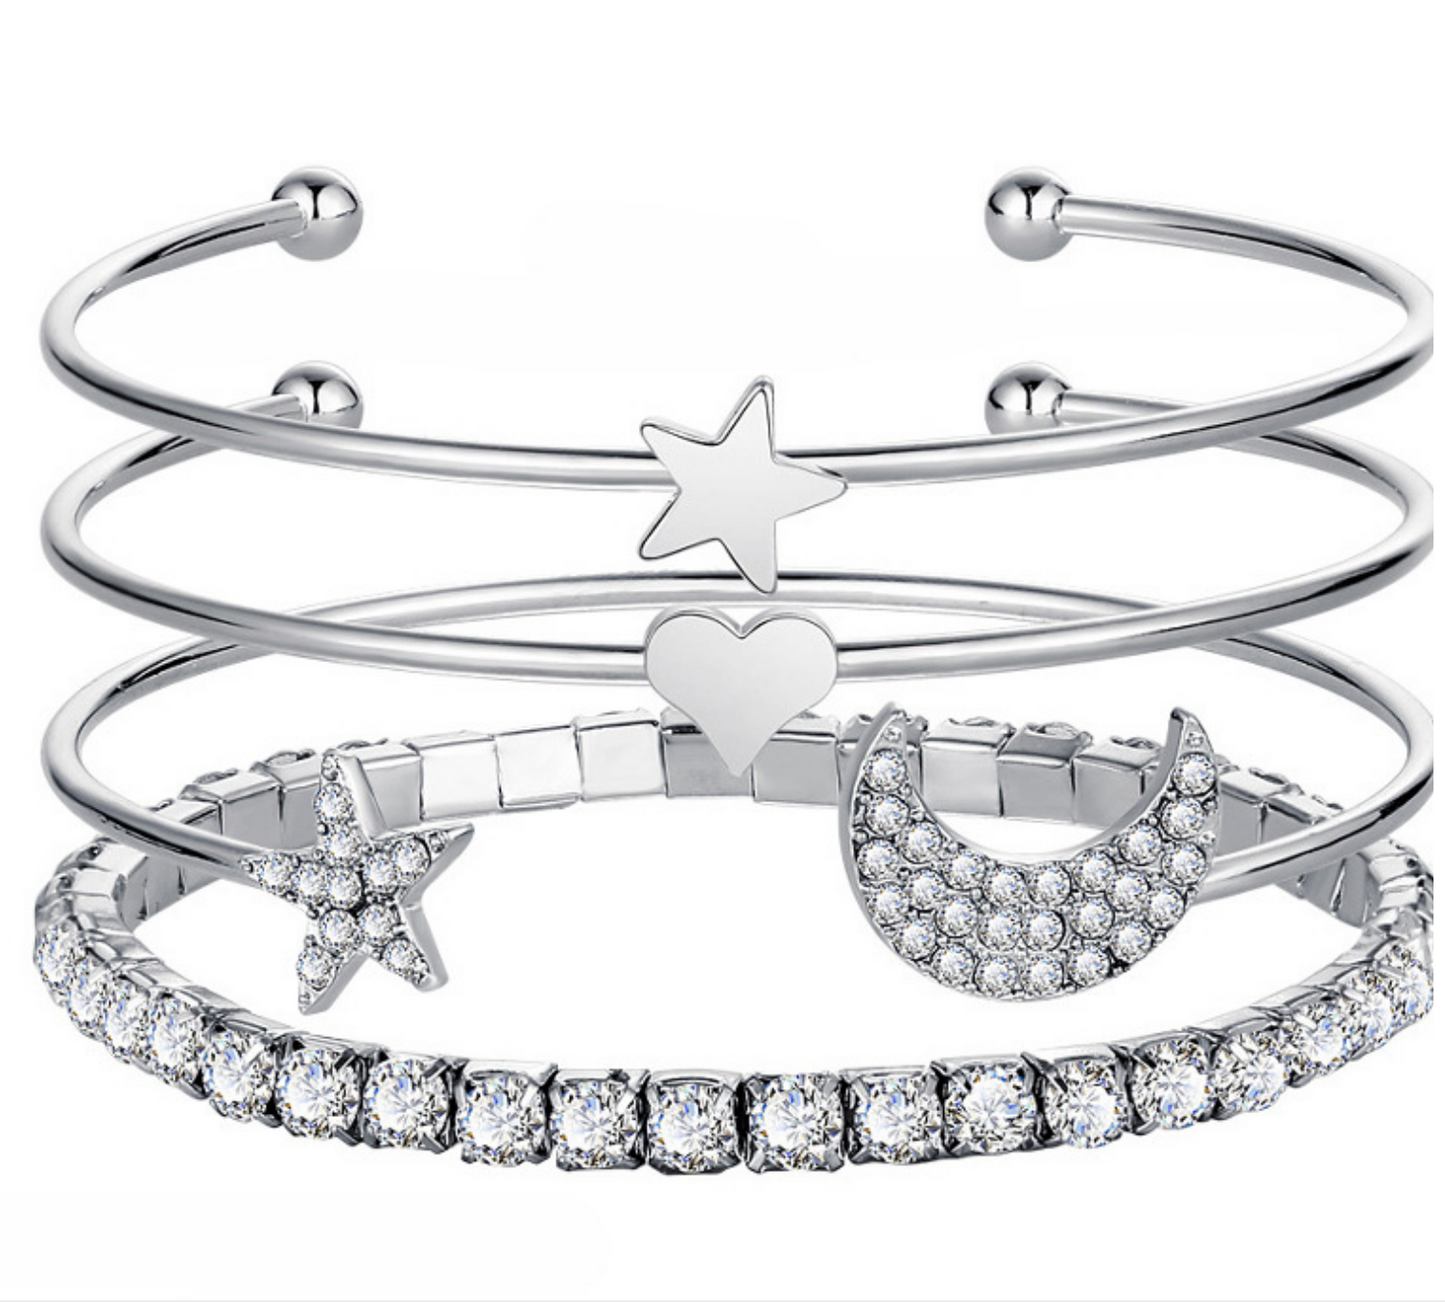 STAR AND MOON BANGLE 4 PIECE SILVER